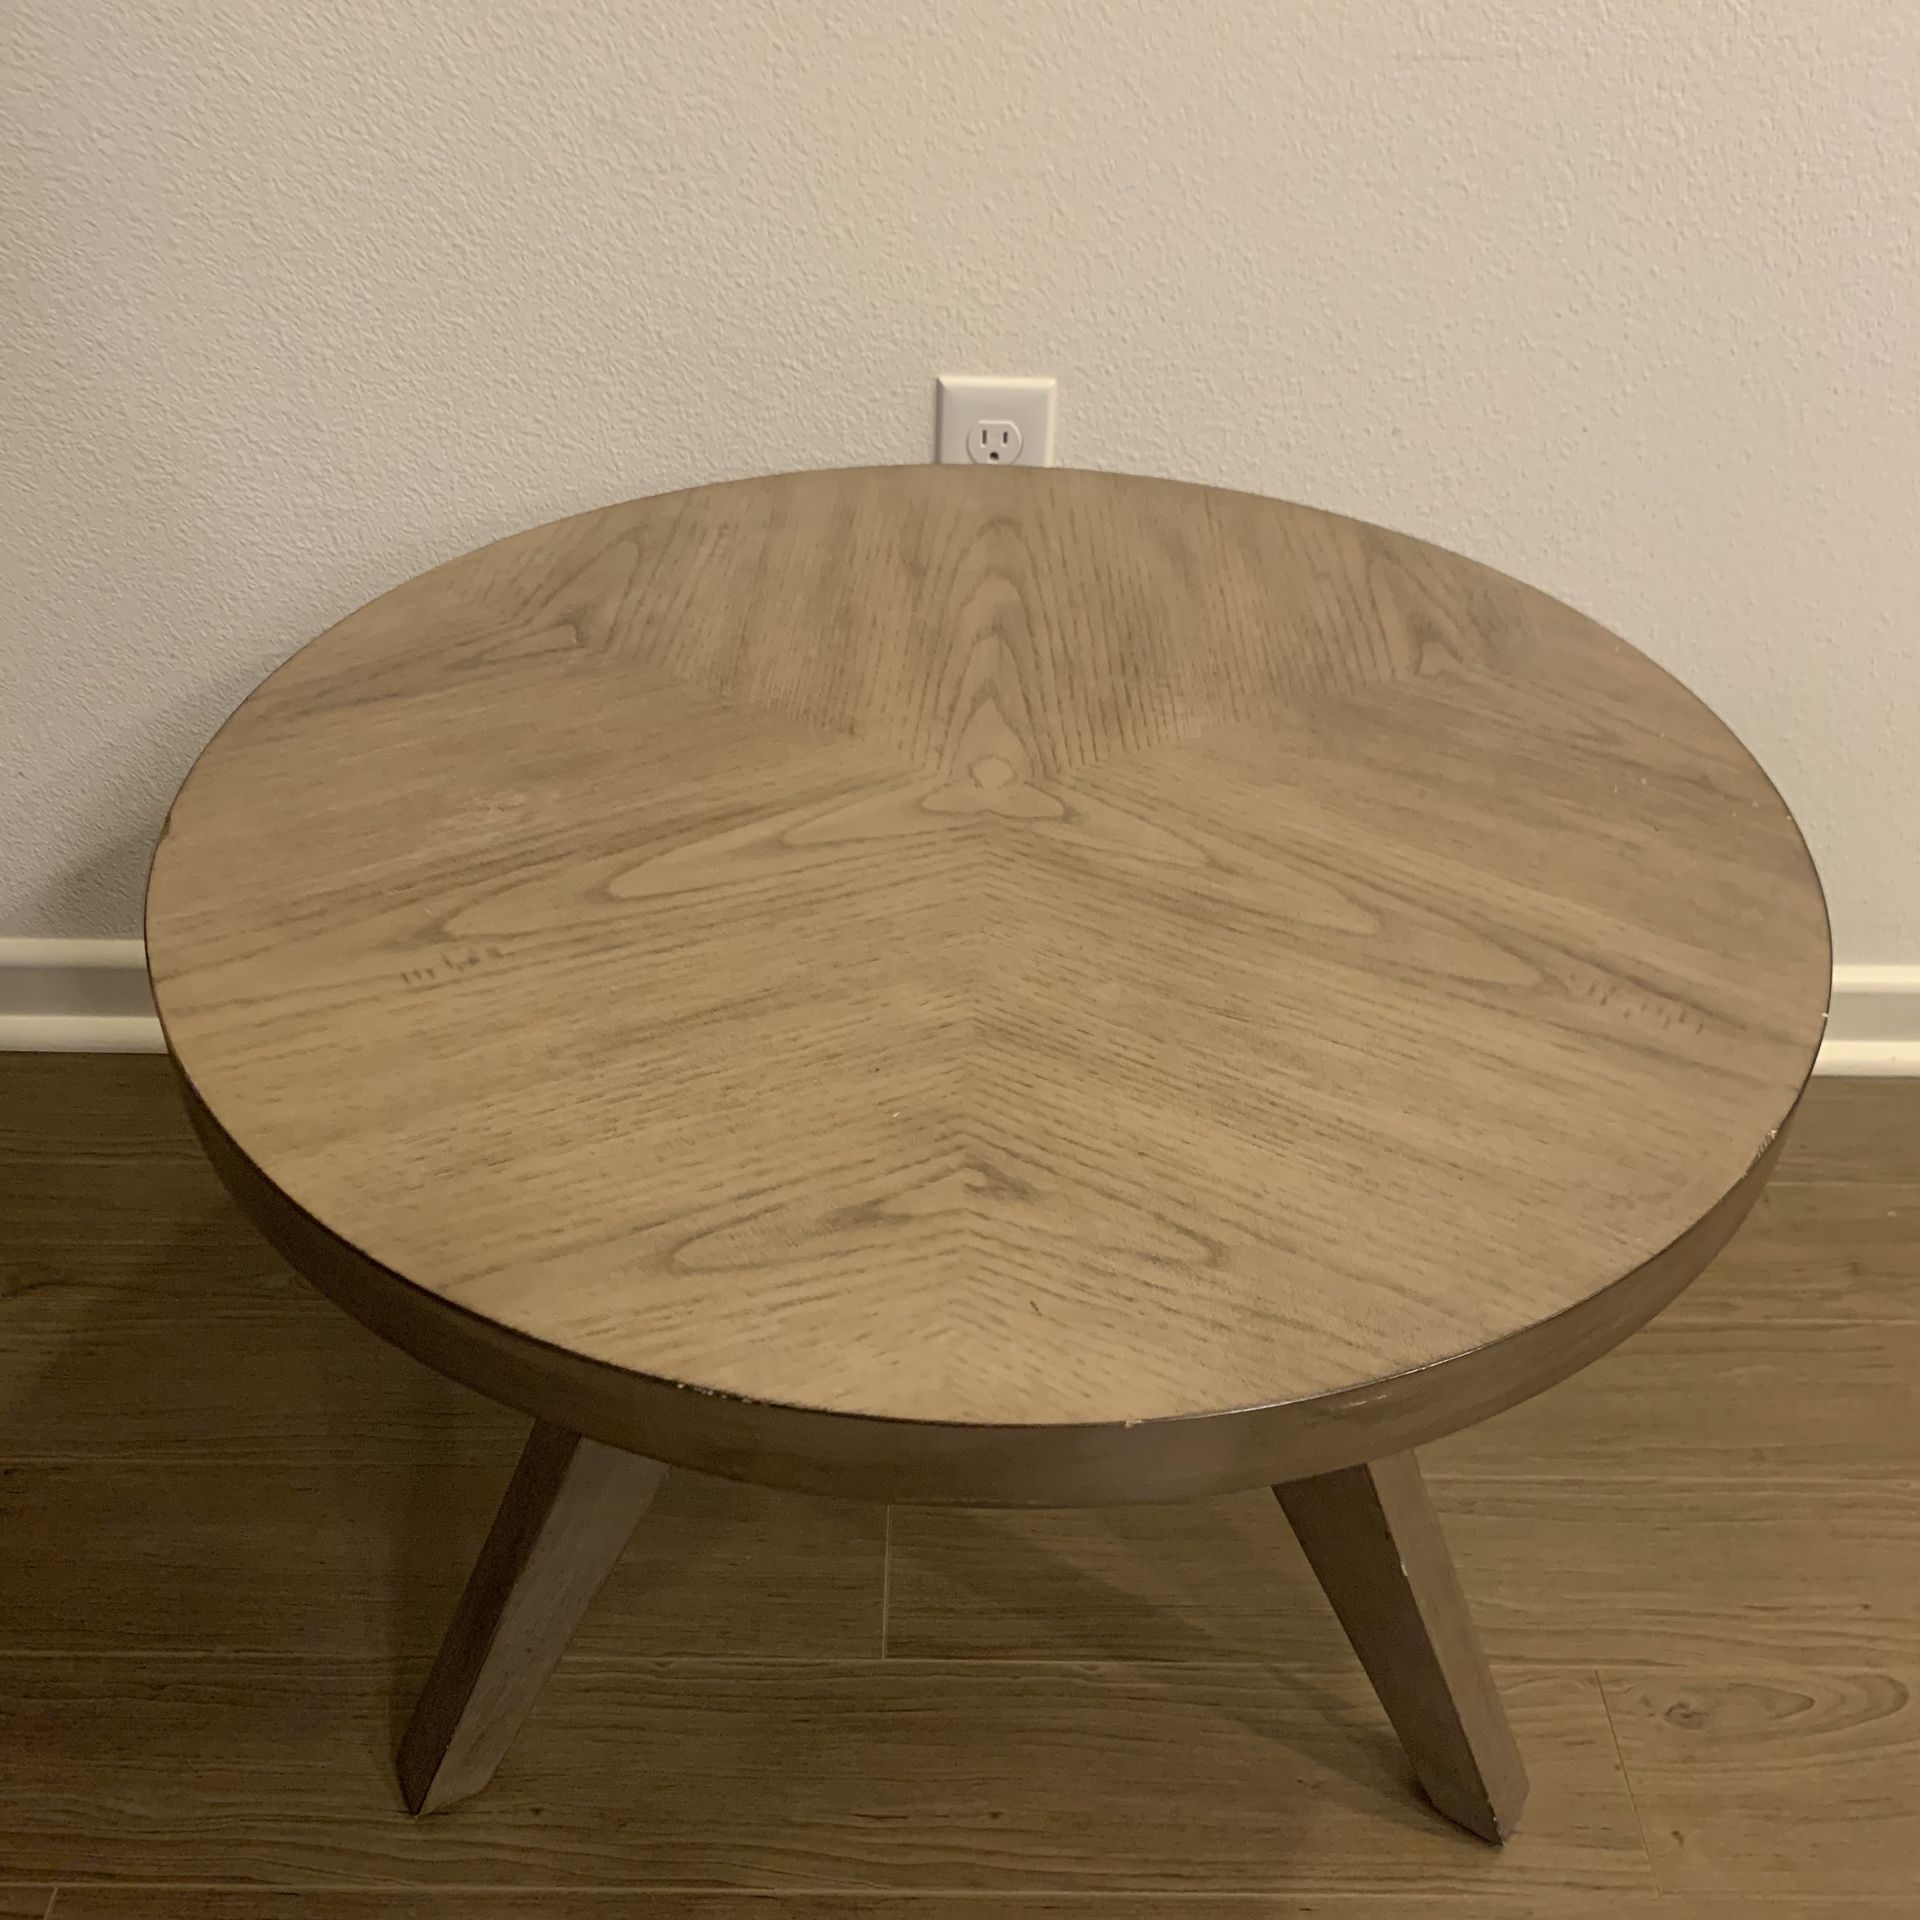 Almost new side table